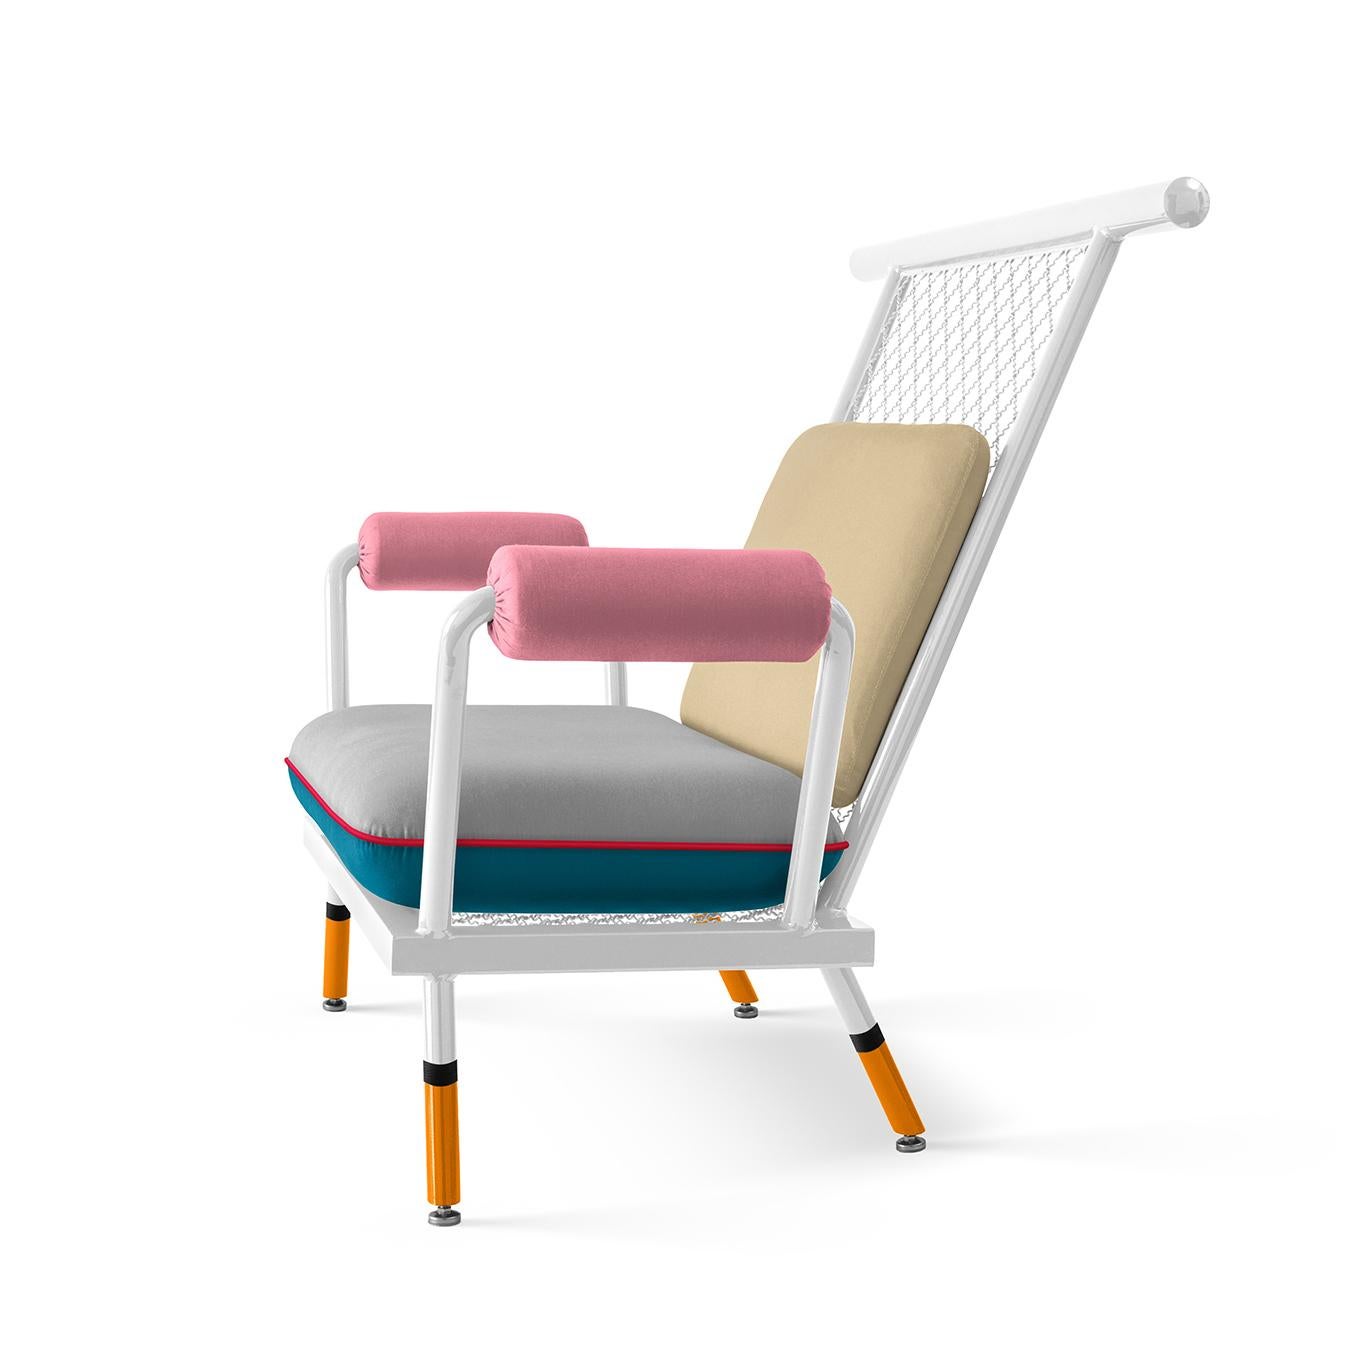 Honorable mention by European Product Design Award: Home Interior Products Category.

The main inspiration for PK6 chair comes from standard metal structures used for secondary architectural projects.
This project transforms industrial profiles